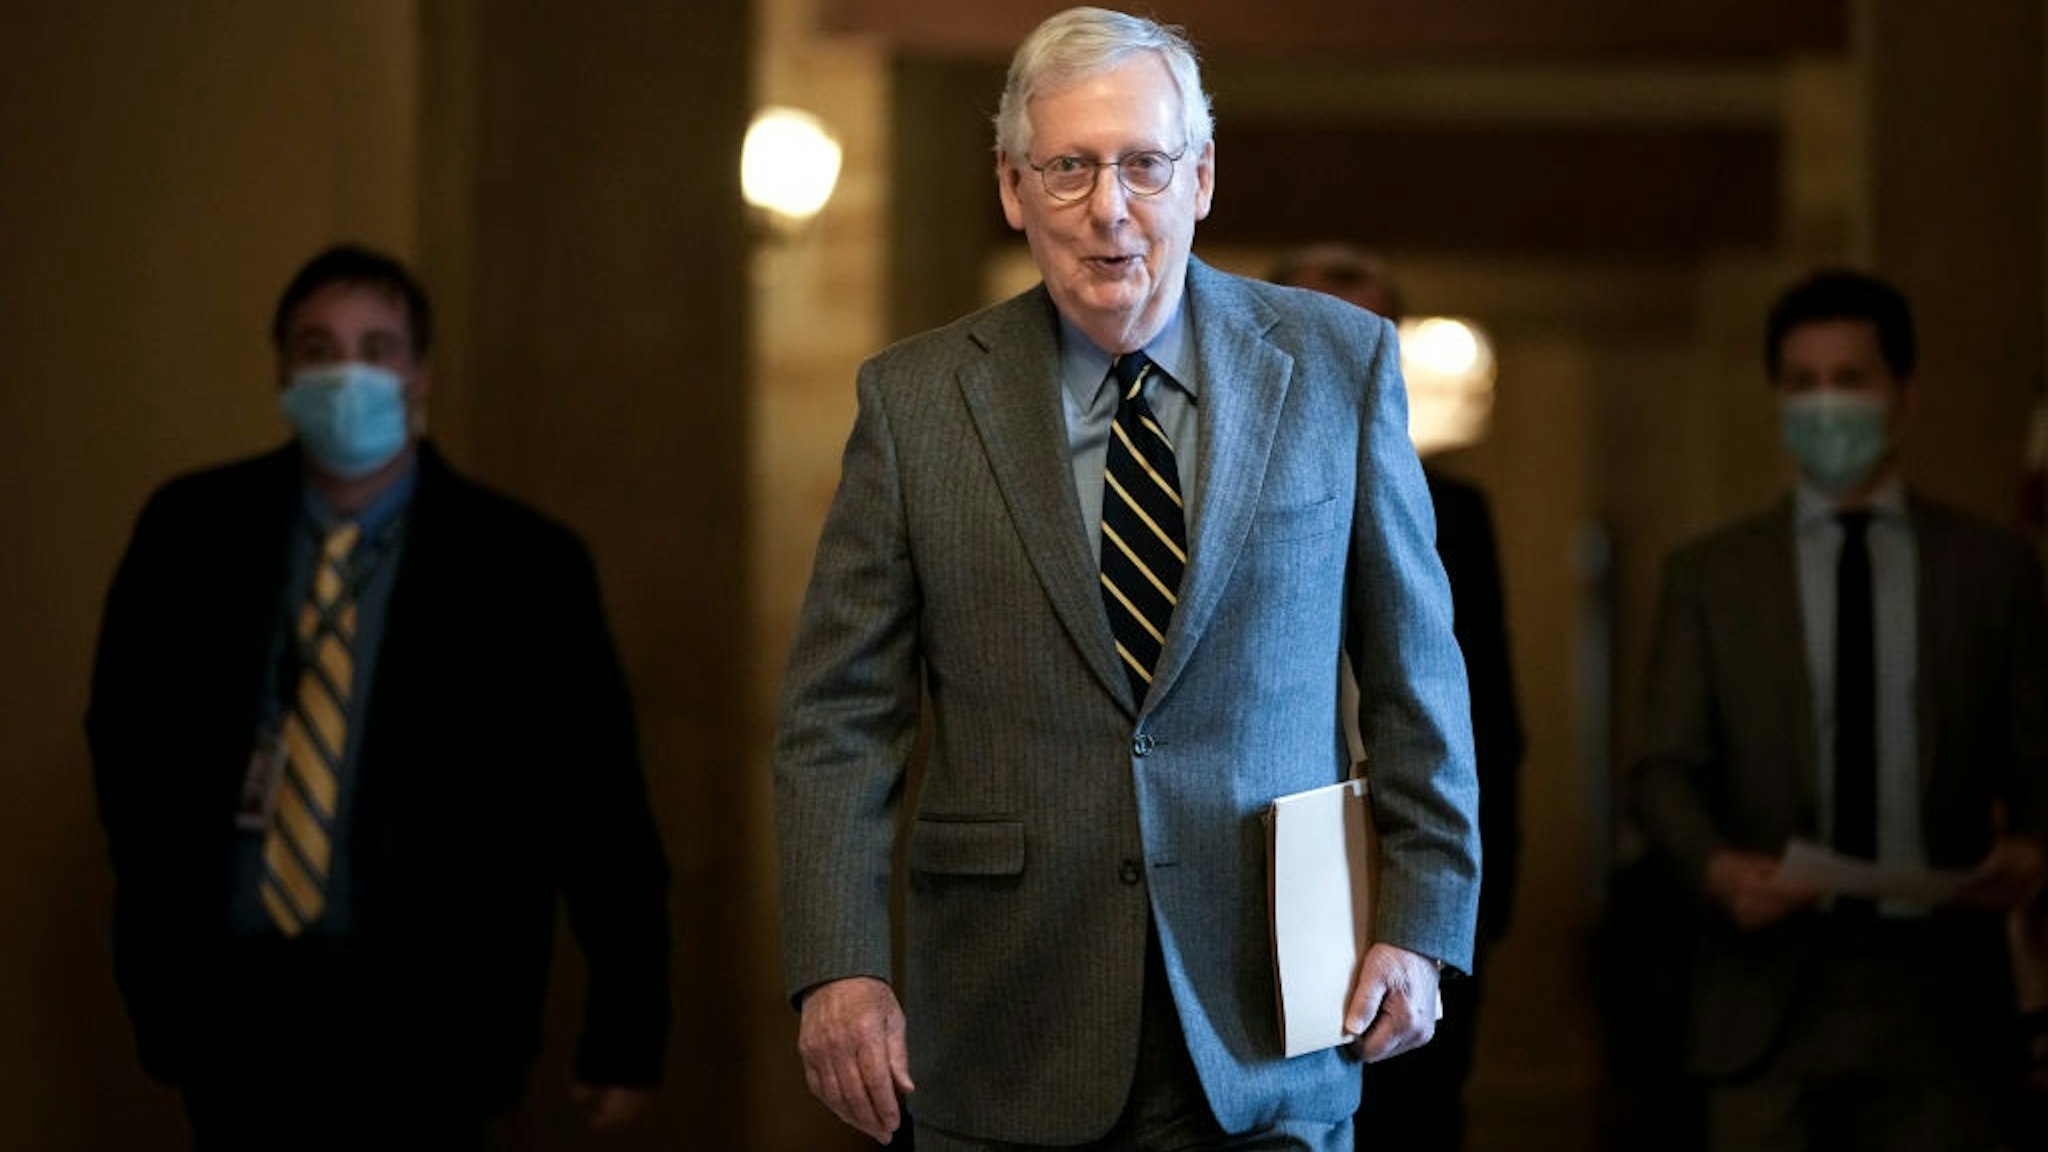 WASHINGTON, DC - JANUARY 5: Senate Minority Leader Mitch McConnell (R-KY) leaves his office and walks to the Senate floor at the U.S. Capitol on January 5, 2022 in Washington, DC.